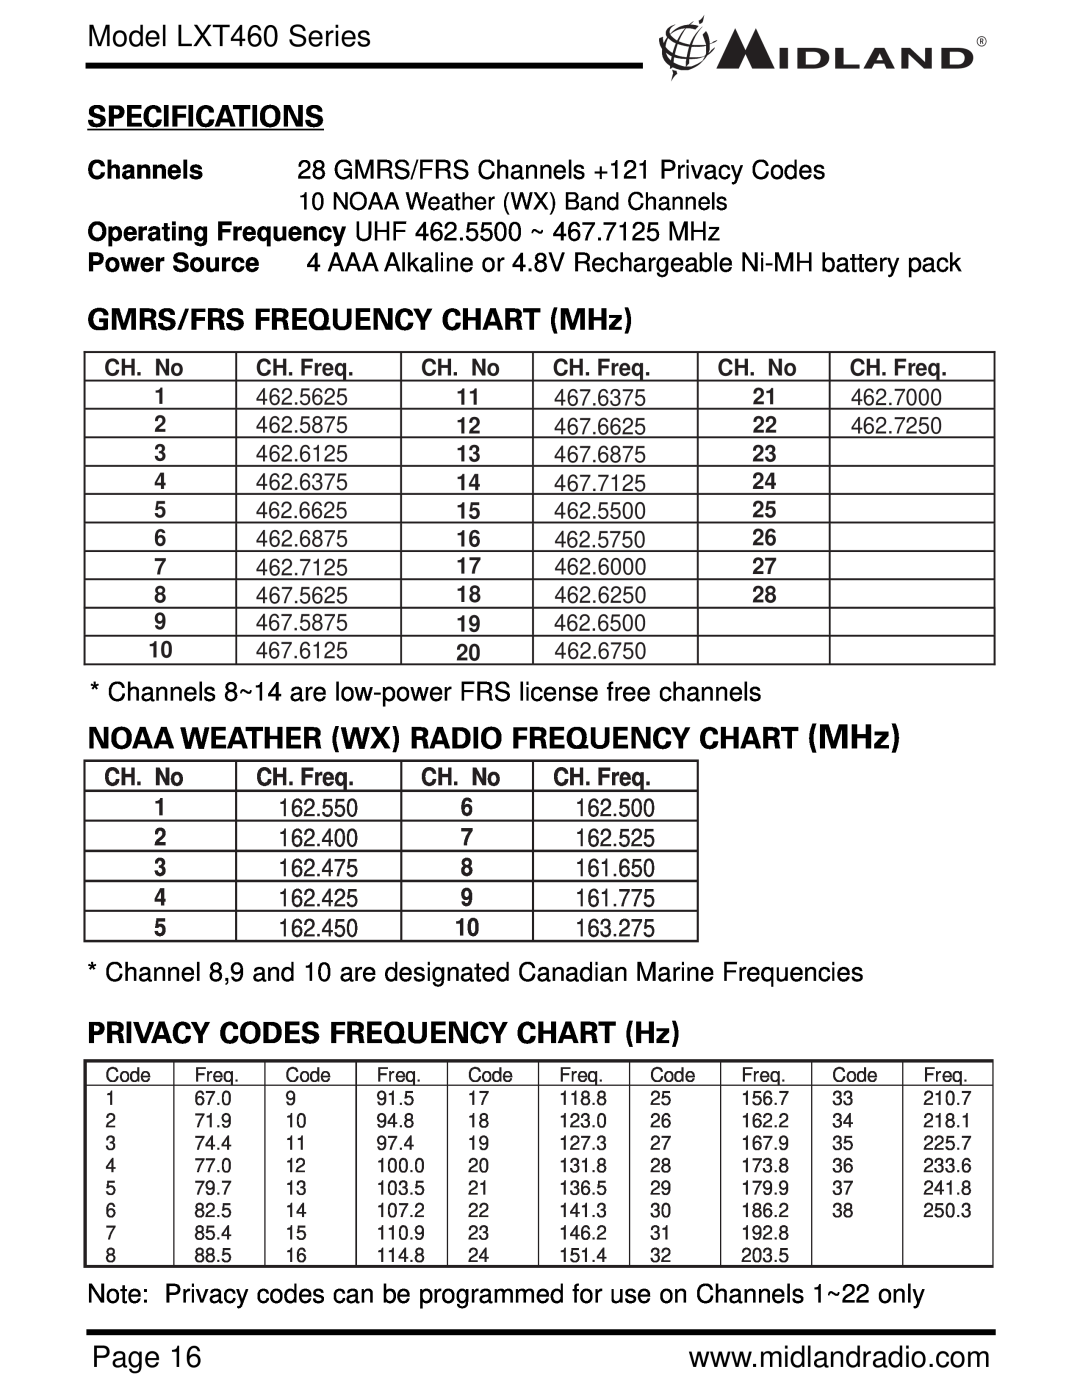 Midland Radio LXT460 Series Specifications, GMRS/FRS FREQUENCY CHART MHz, NOAA WEATHER WX RADIO FREQUENCY CHART MHz 